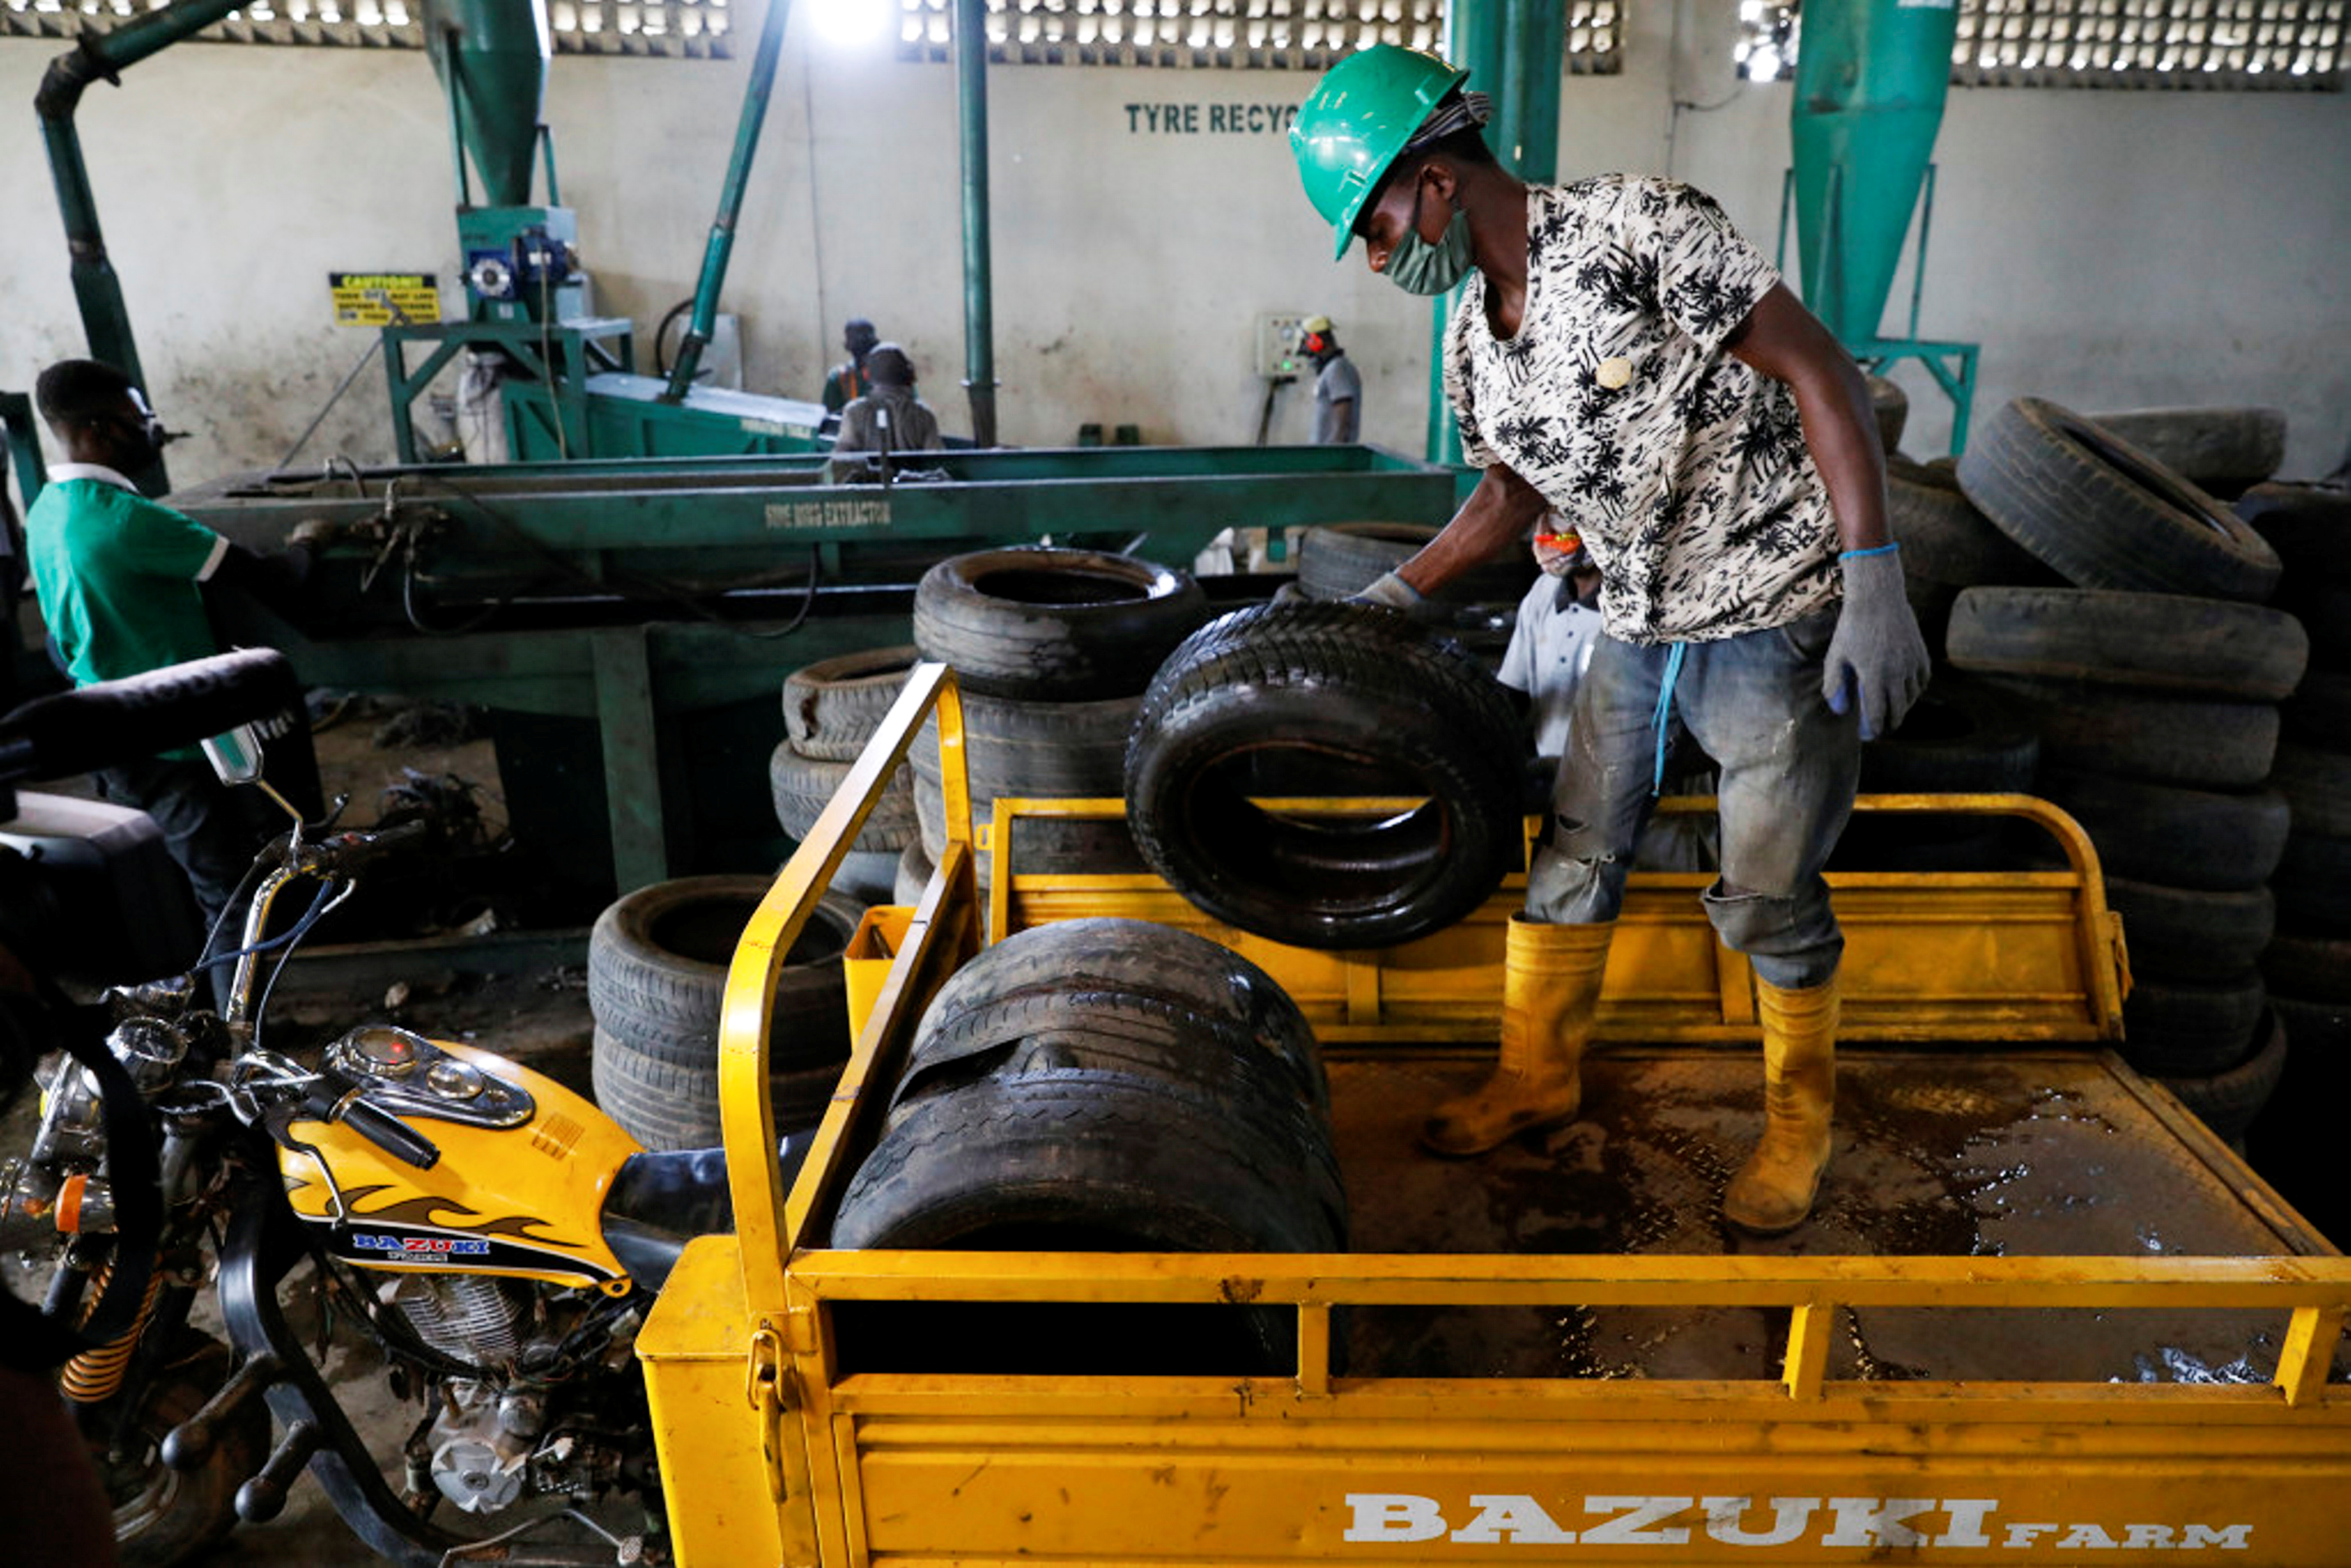 Worker offloads used car tyres from a cargo tricycle in preparation for recycling in Ibadan